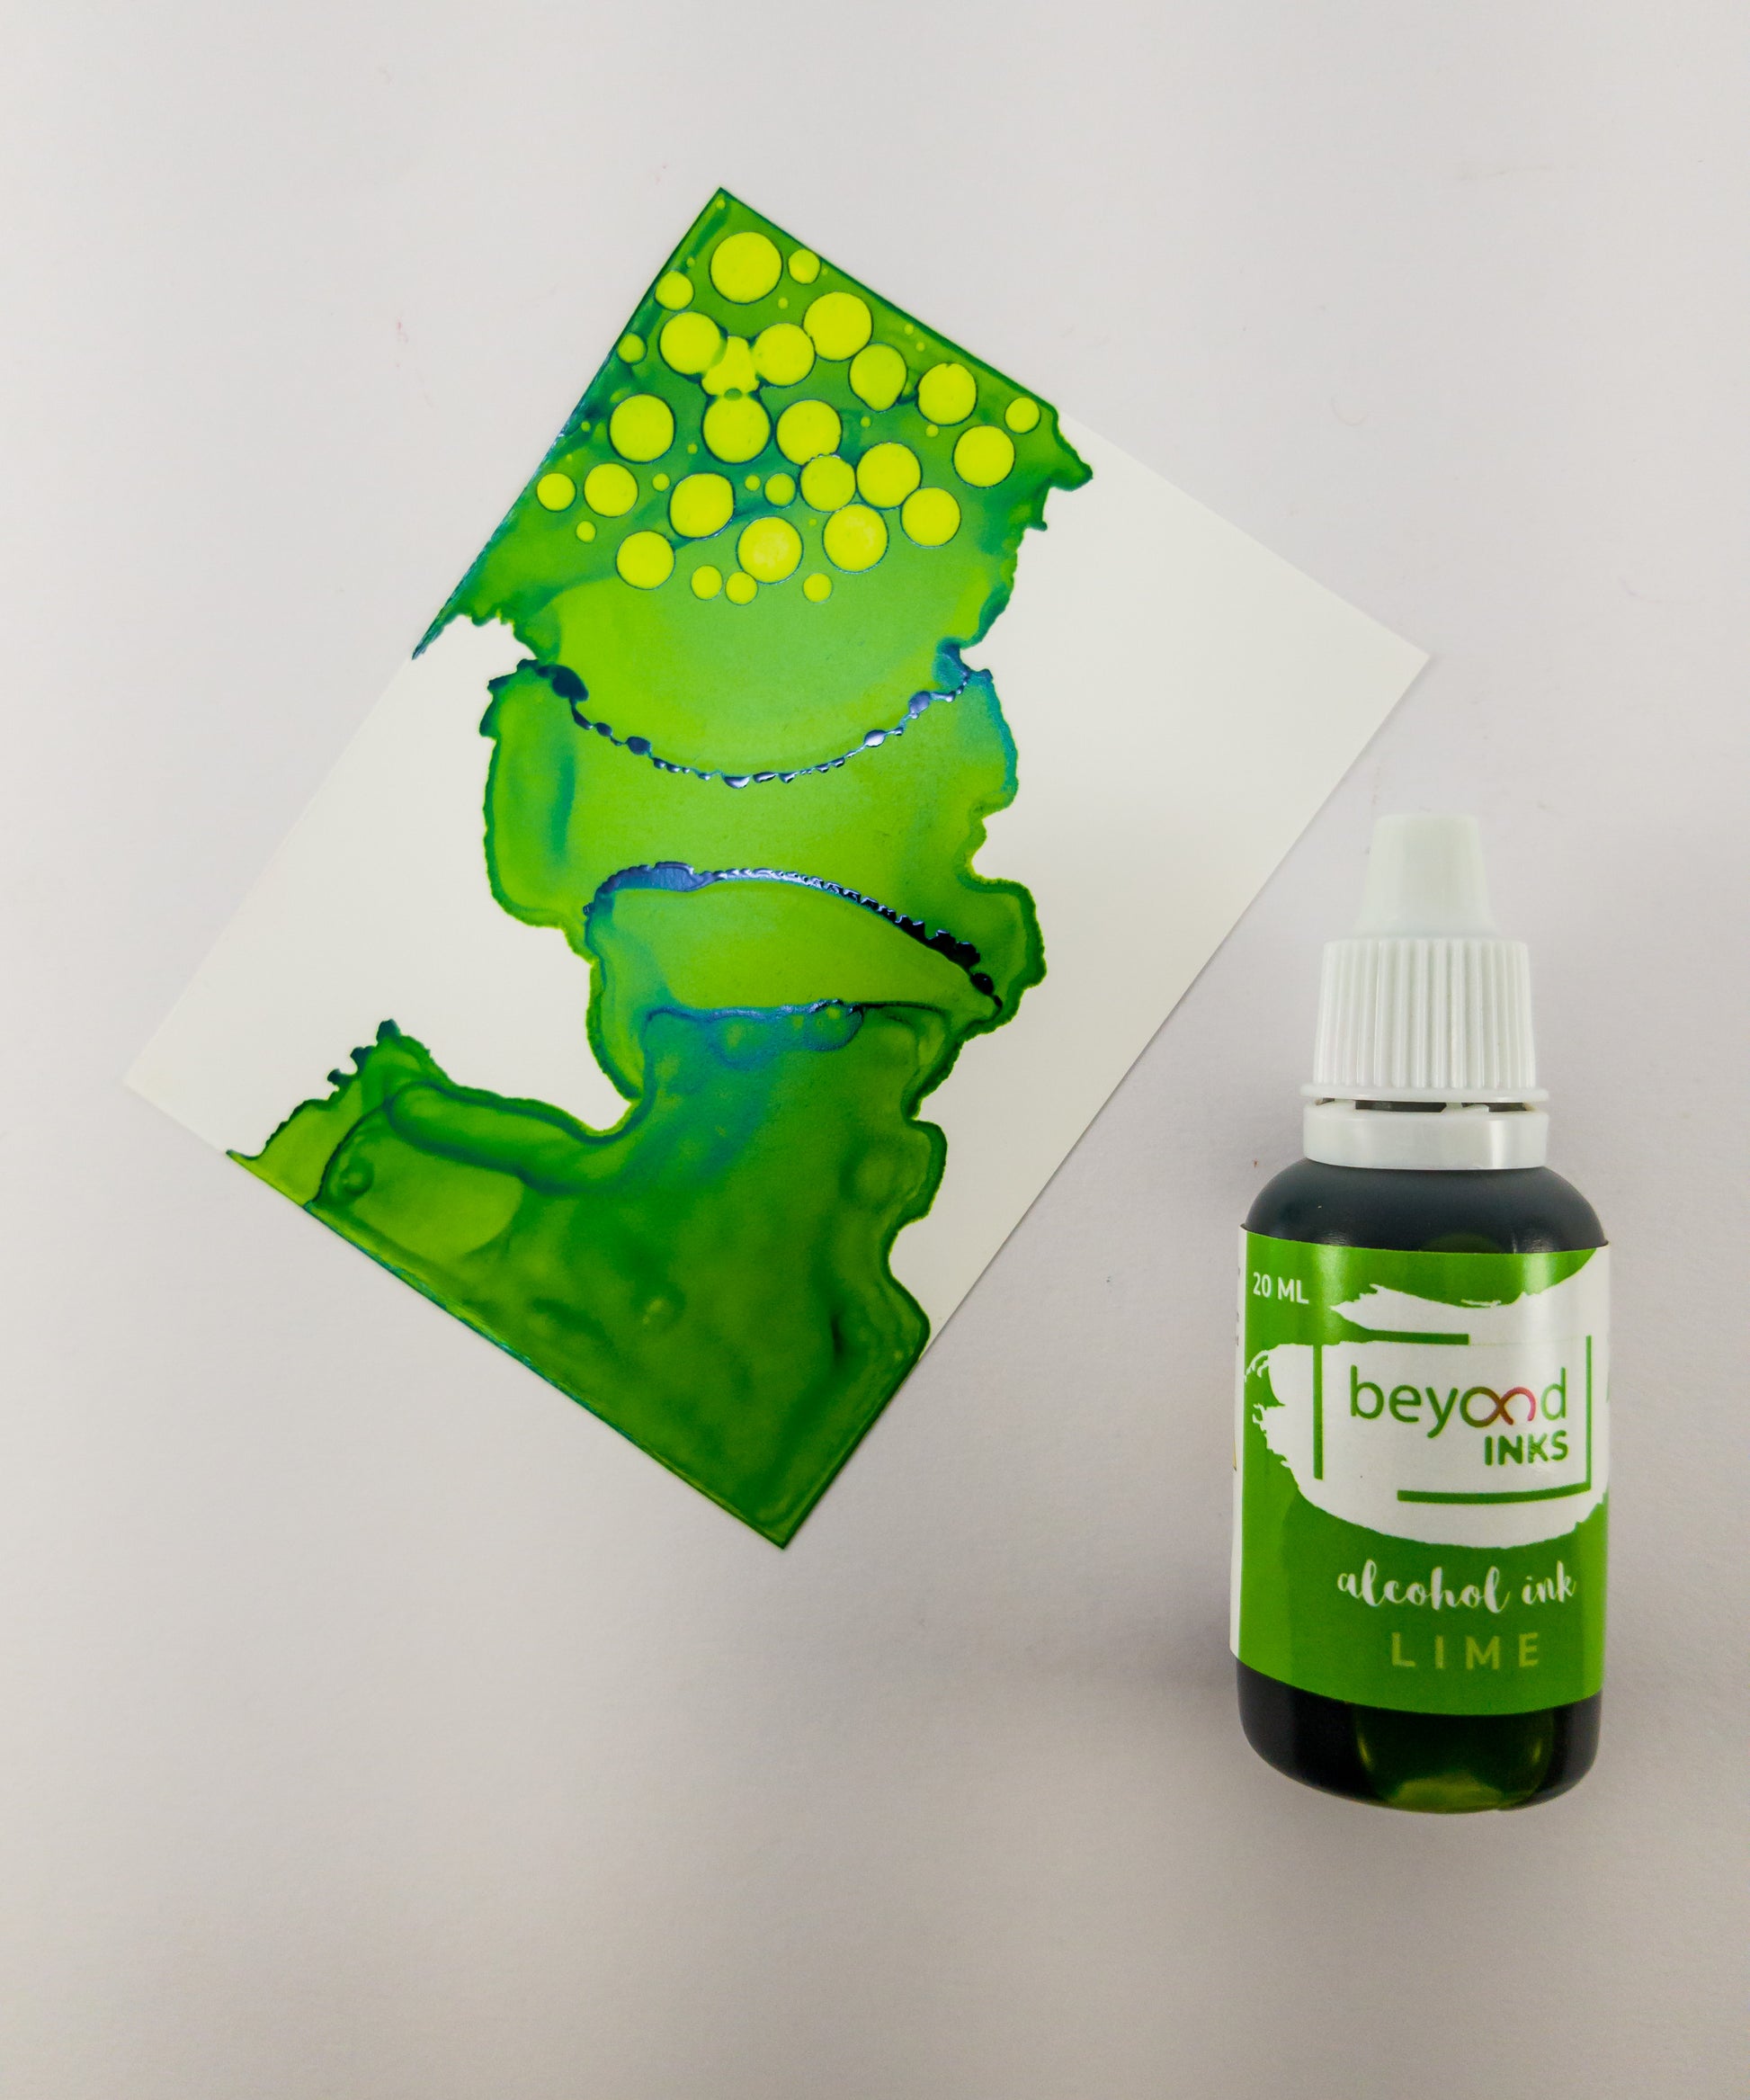 Natural Green Alcohol Ink 20ml By Get Inspired For Alcohol and Resin Art